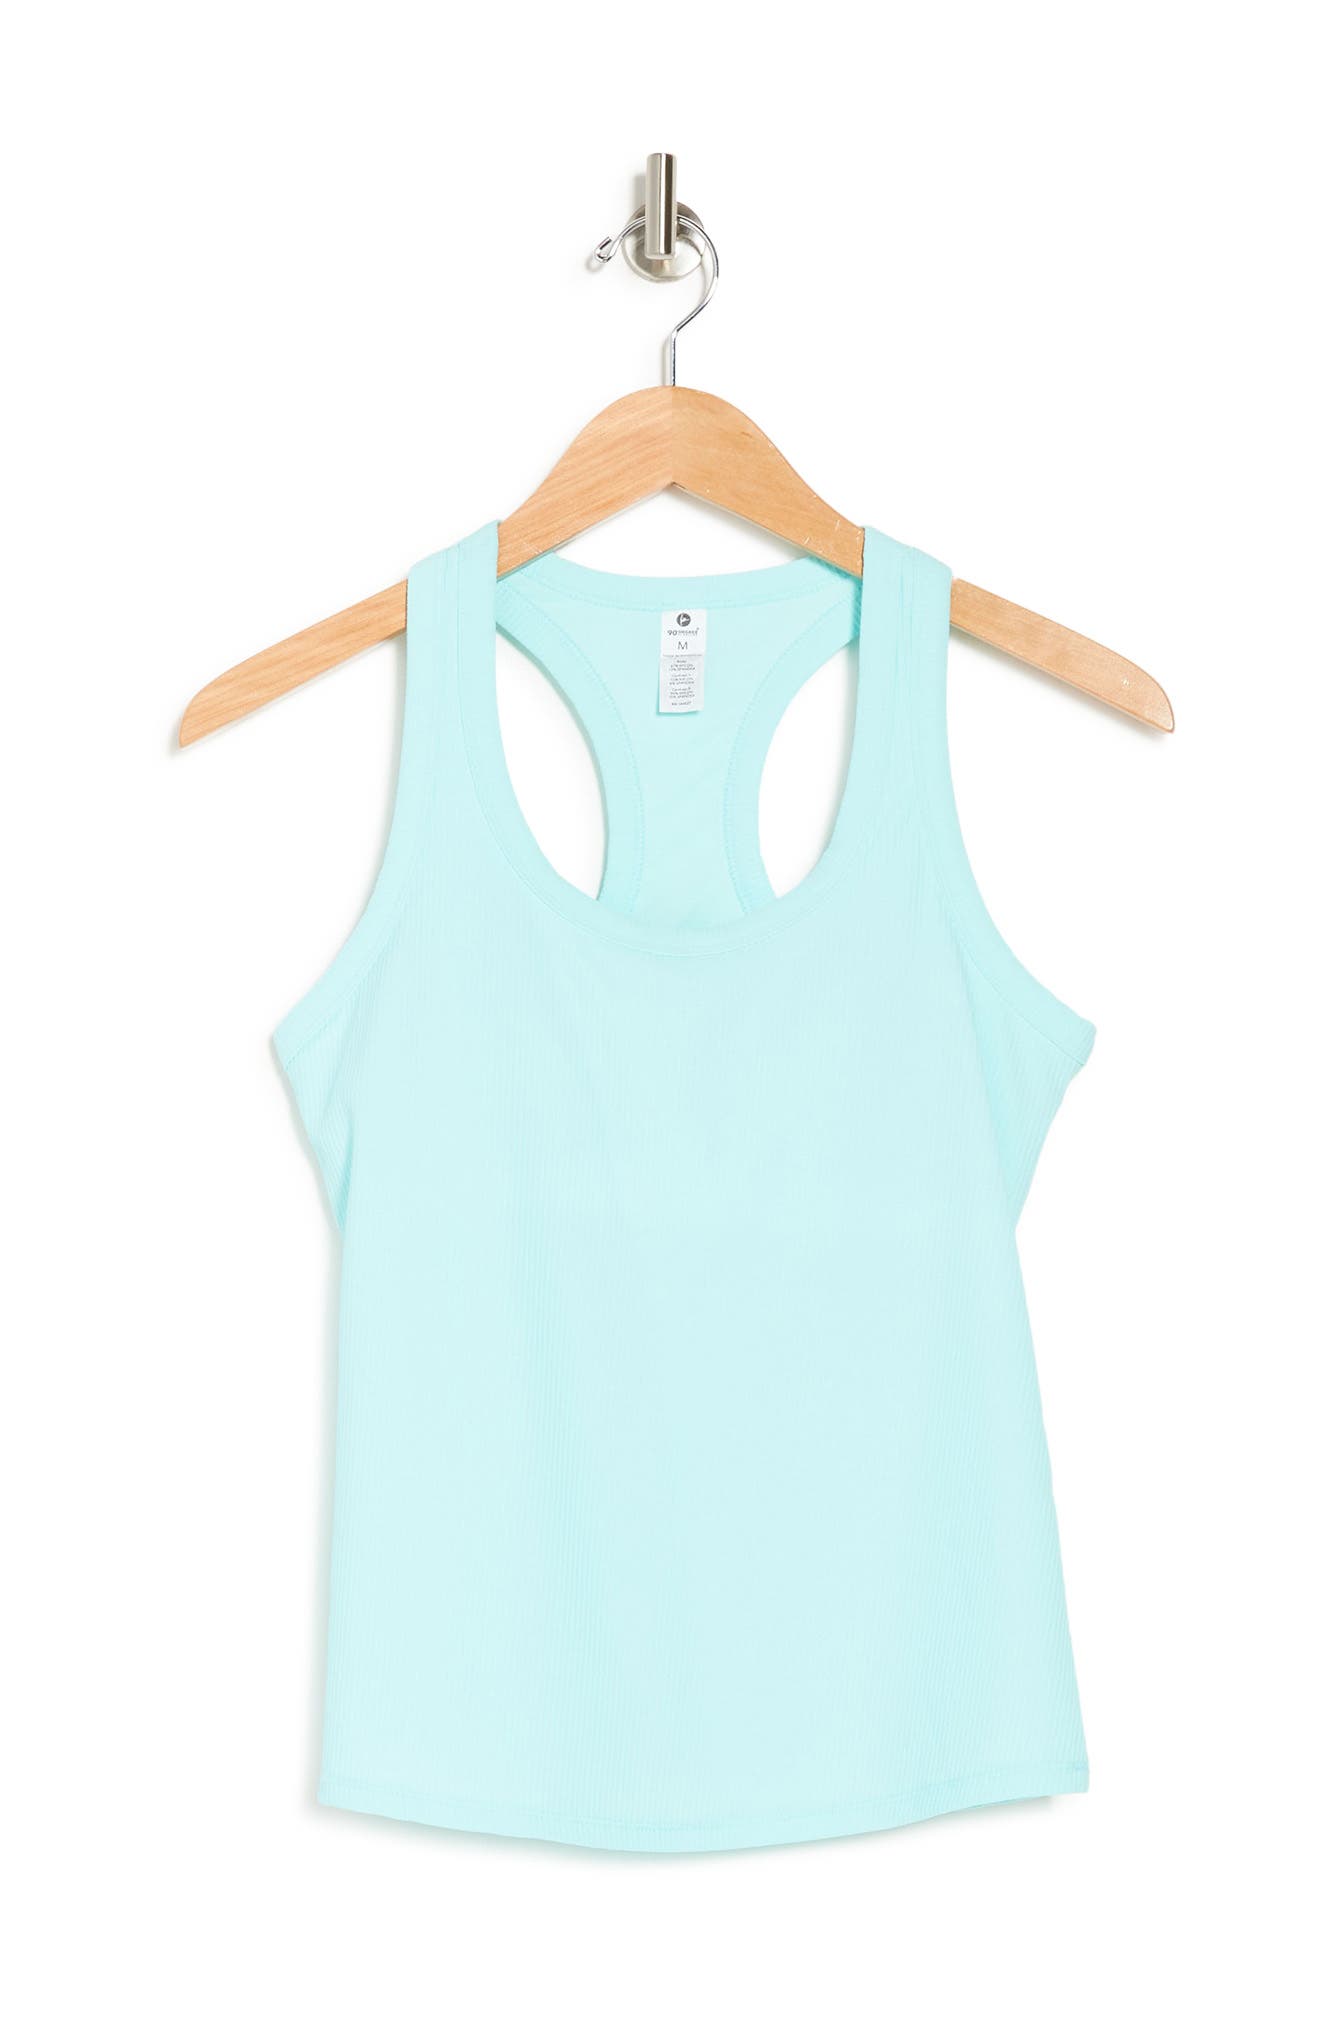 90 Degree By Reflex Ribbed Racerback Tank Top In Turquoise/aqua2